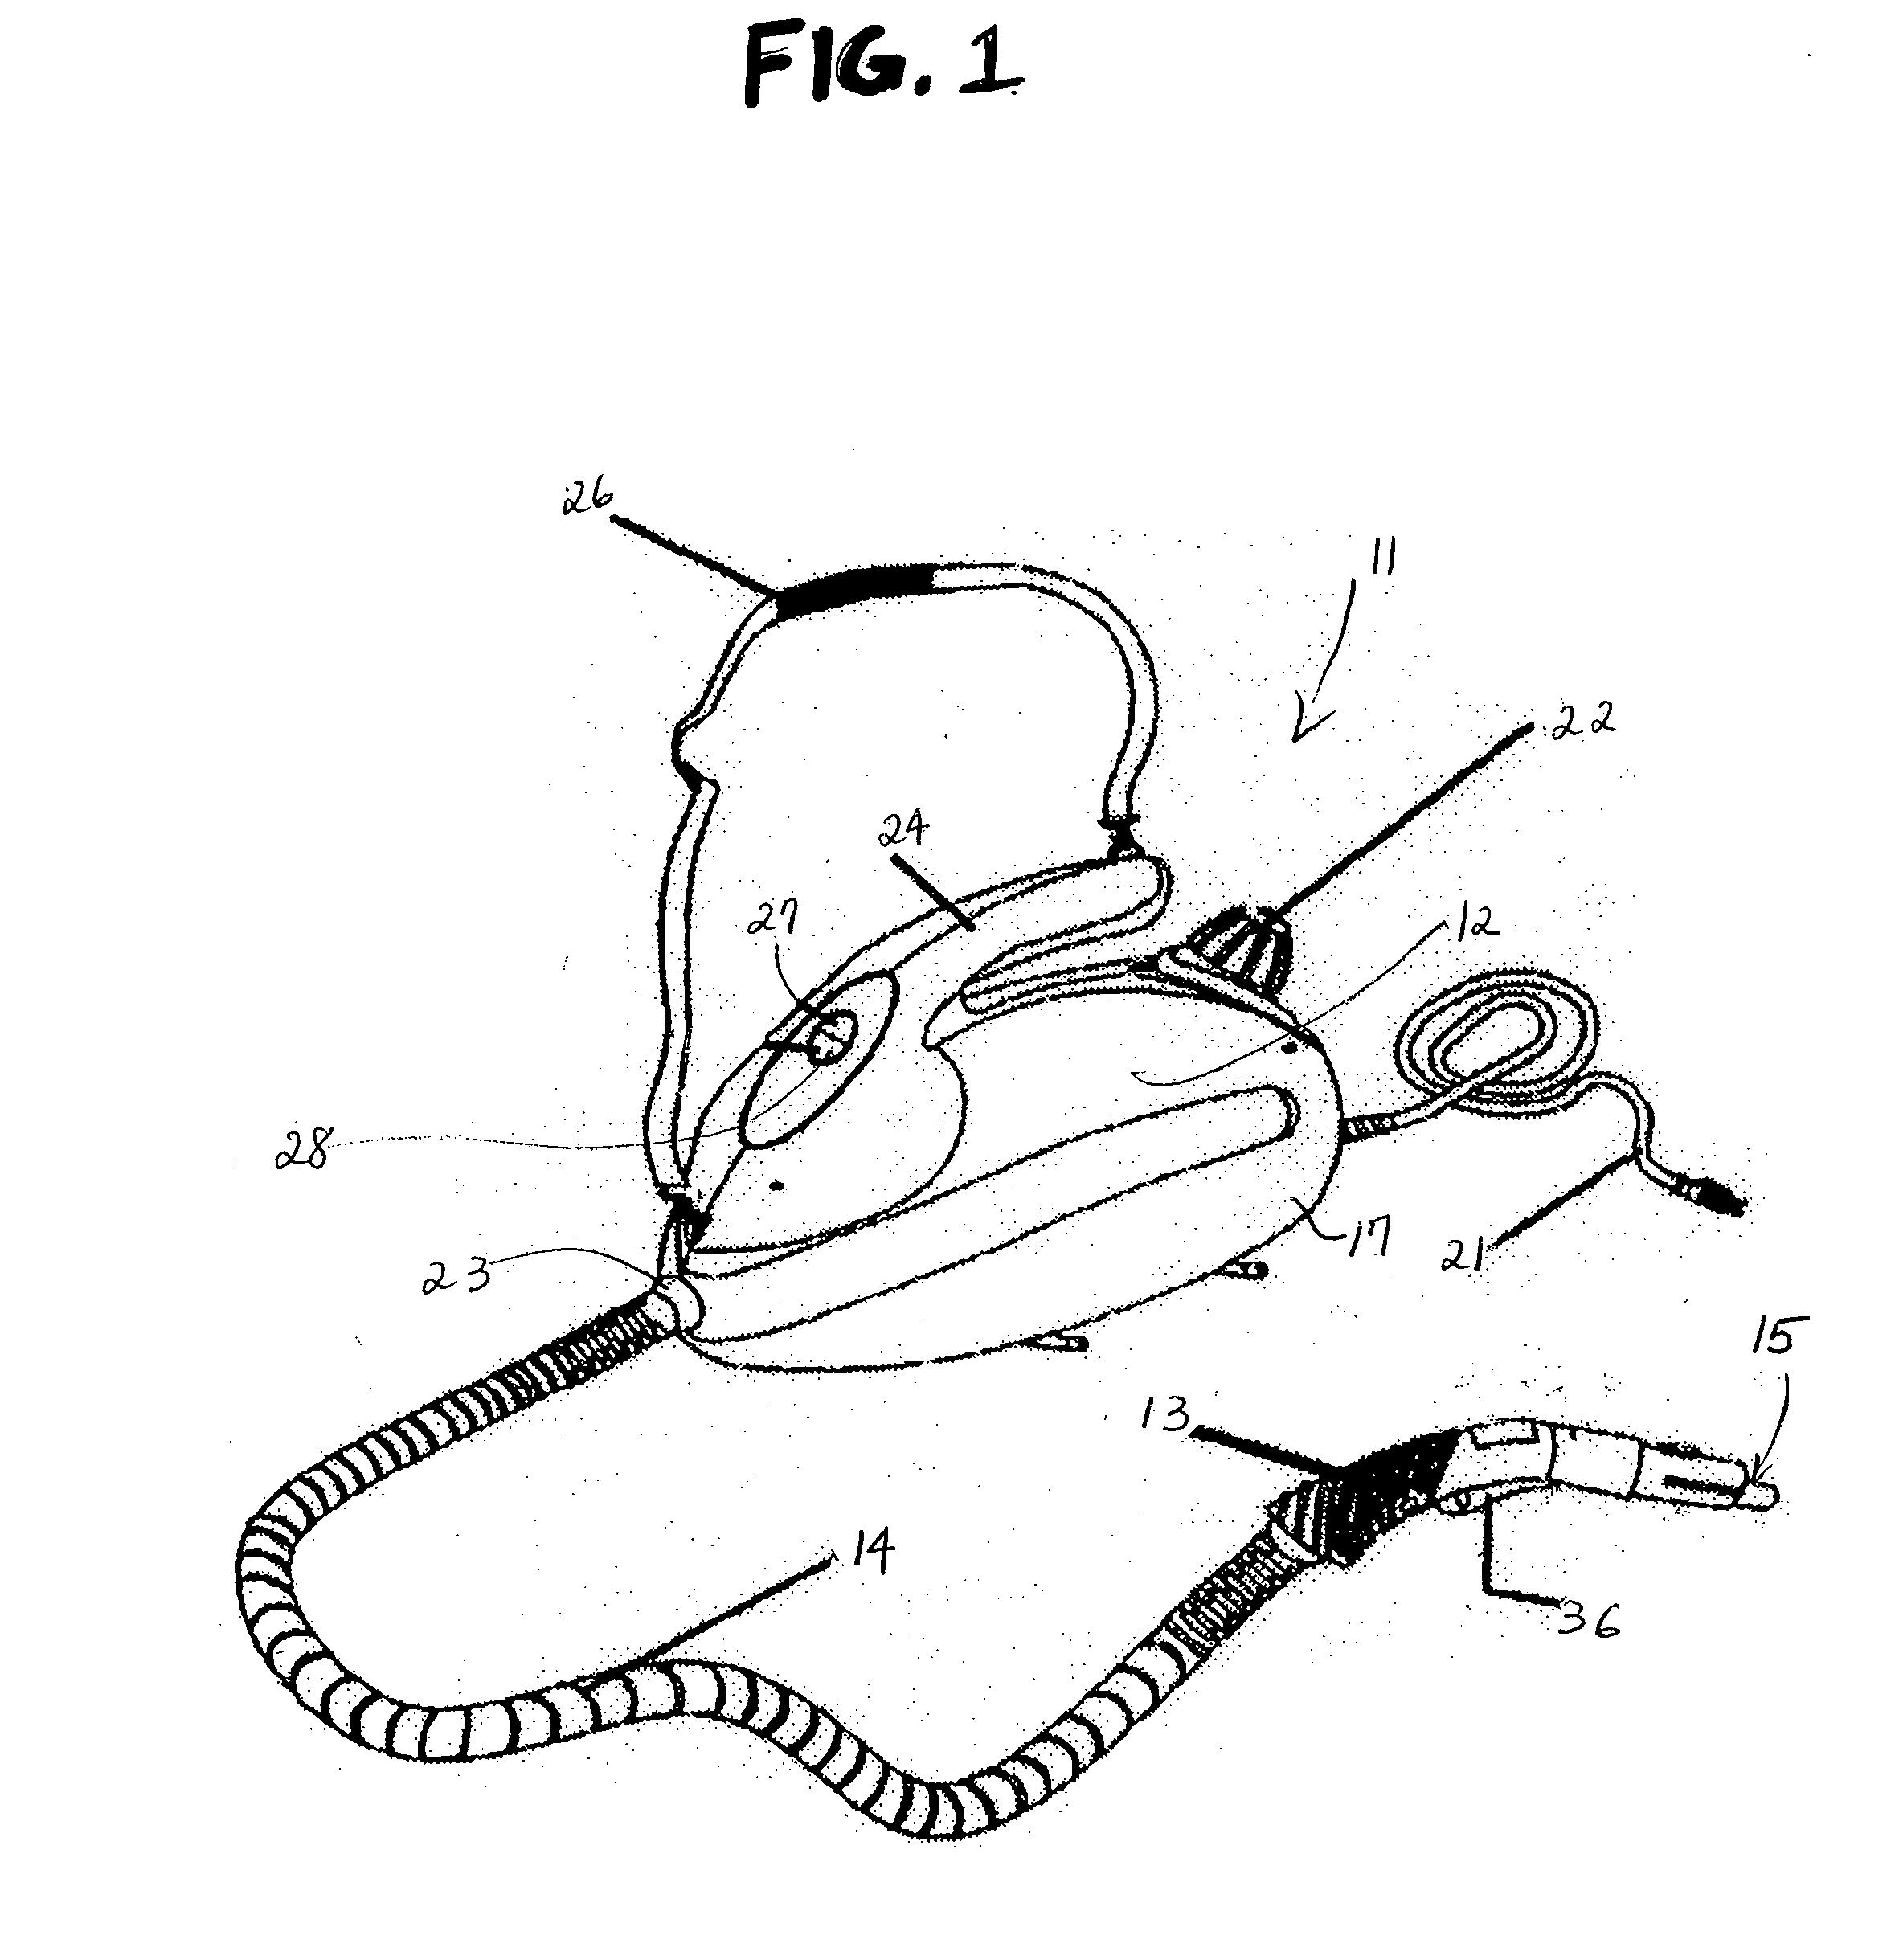 Liquid dispensing device and steam cleaner containing same